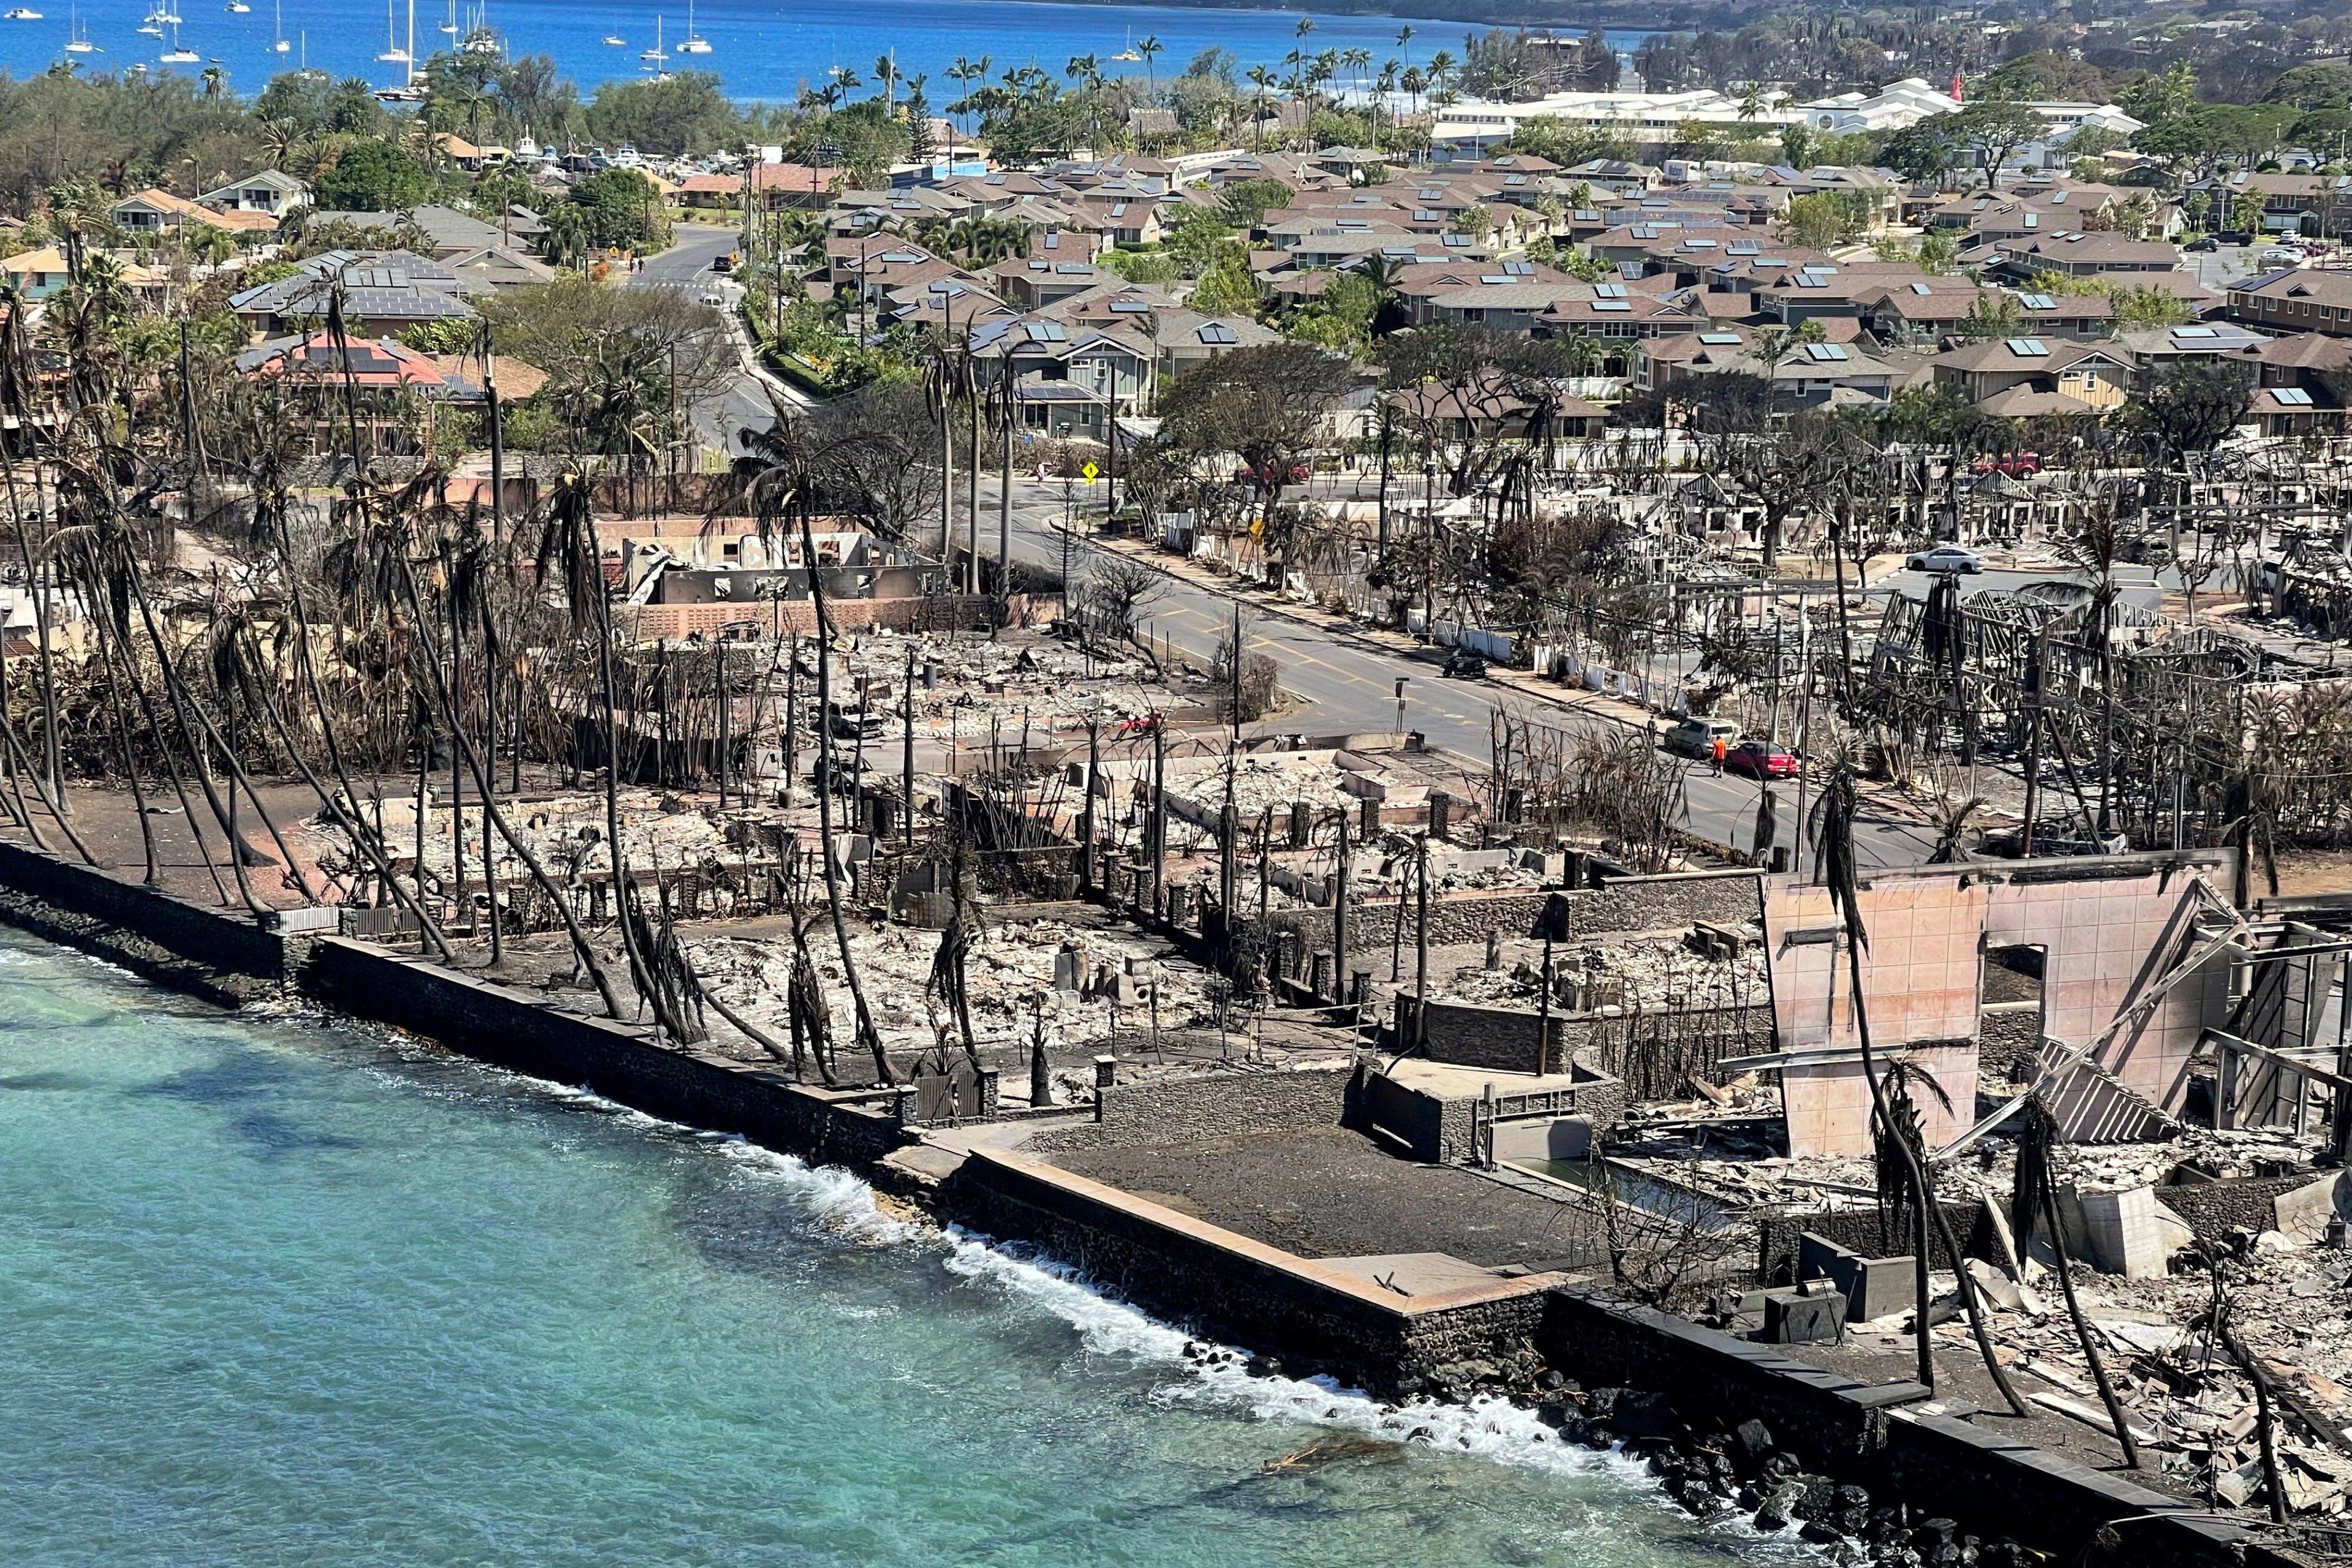 Reuters: The shells of burned houses and buildings are left after wildfires driven by high winds burned across most of the town in Lahaina, Maui, Hawaii, U.S. August 11, 2023. Hawai'i Department of Land and Natural Resources/Handout via REUTERS